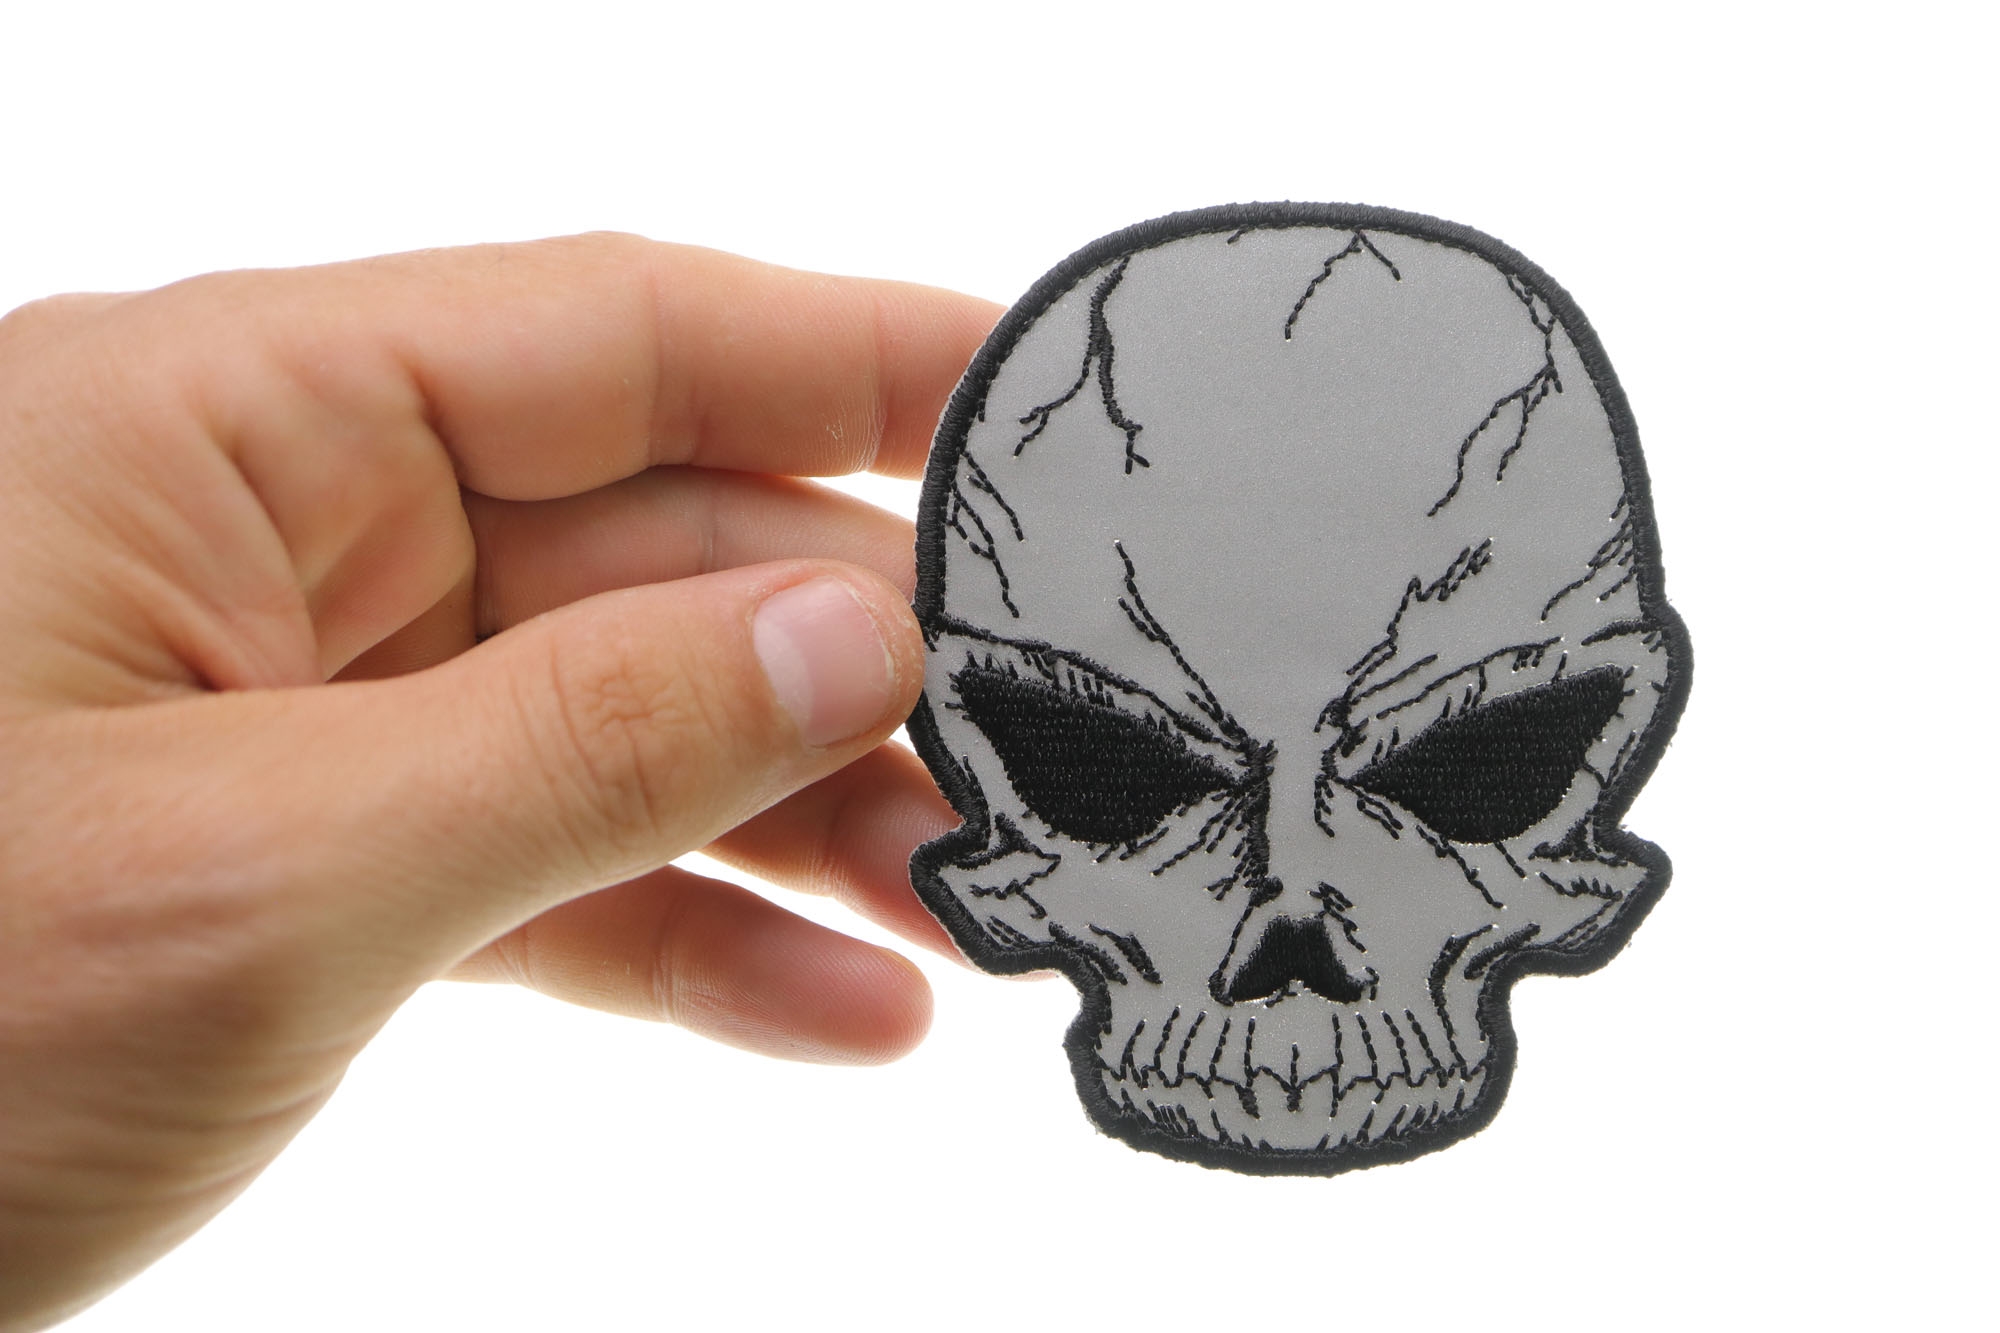 Reflective Small Cracked Skull Patch Skull Patches Thecheapplace